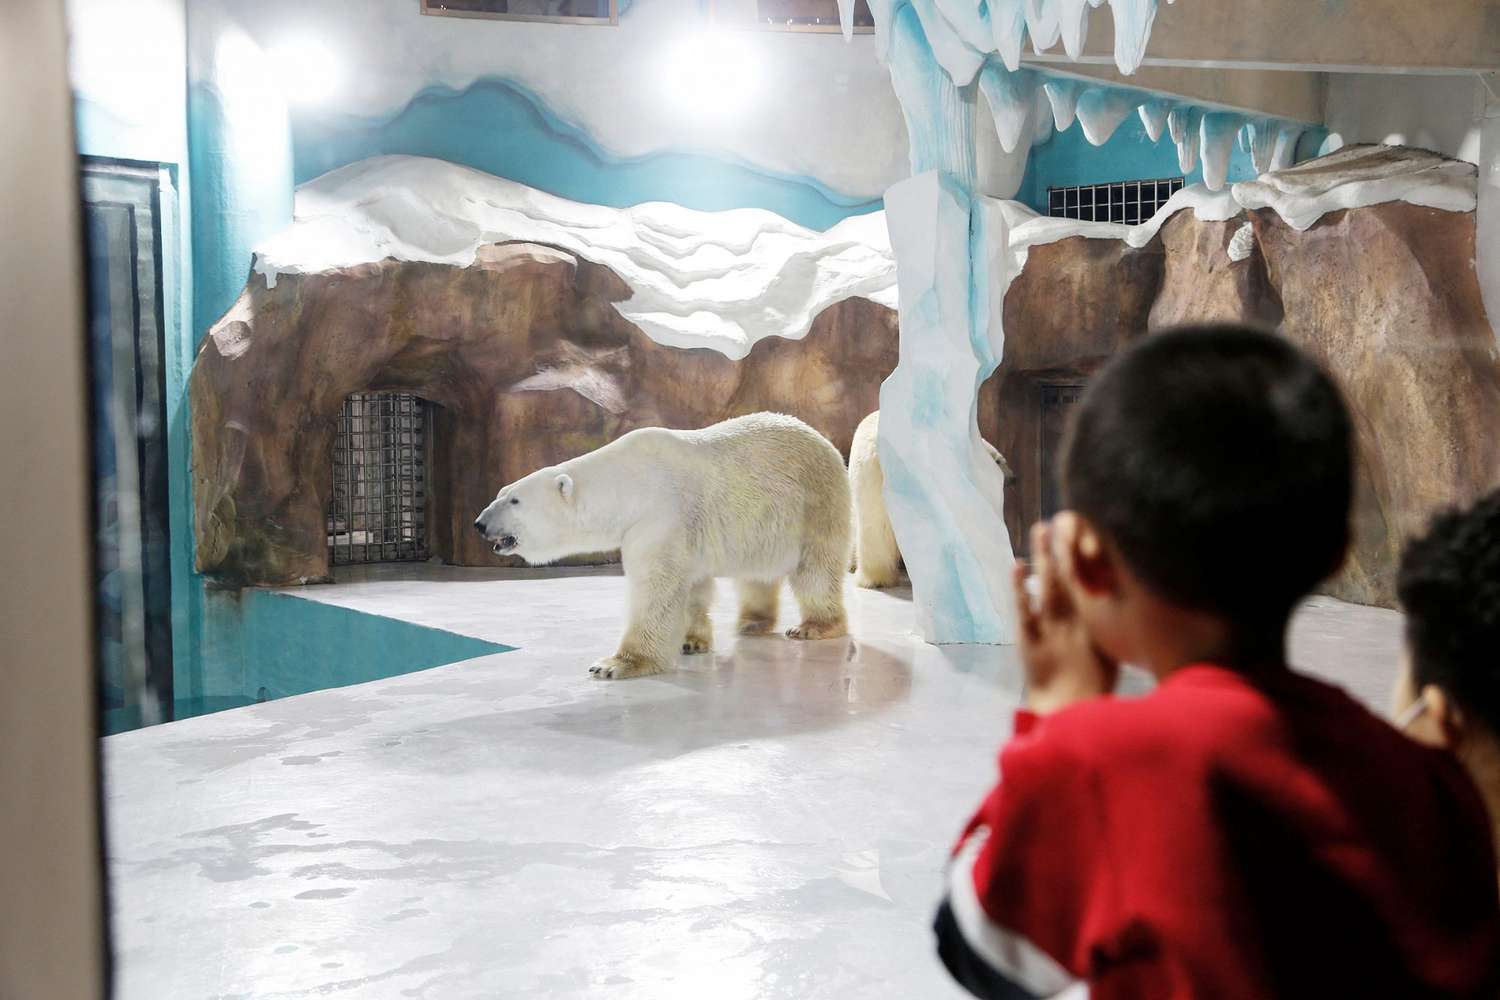 People look at a polar bear inside an enclosure at a newly-opened hotel, which allows guests views of the animals - listed as a vulnerable species by the International Union for Conservation of Nature (IUCN) - from rooms on the premises in Harbin, northeastern China's Heilongjiang province, on March 12, 2021